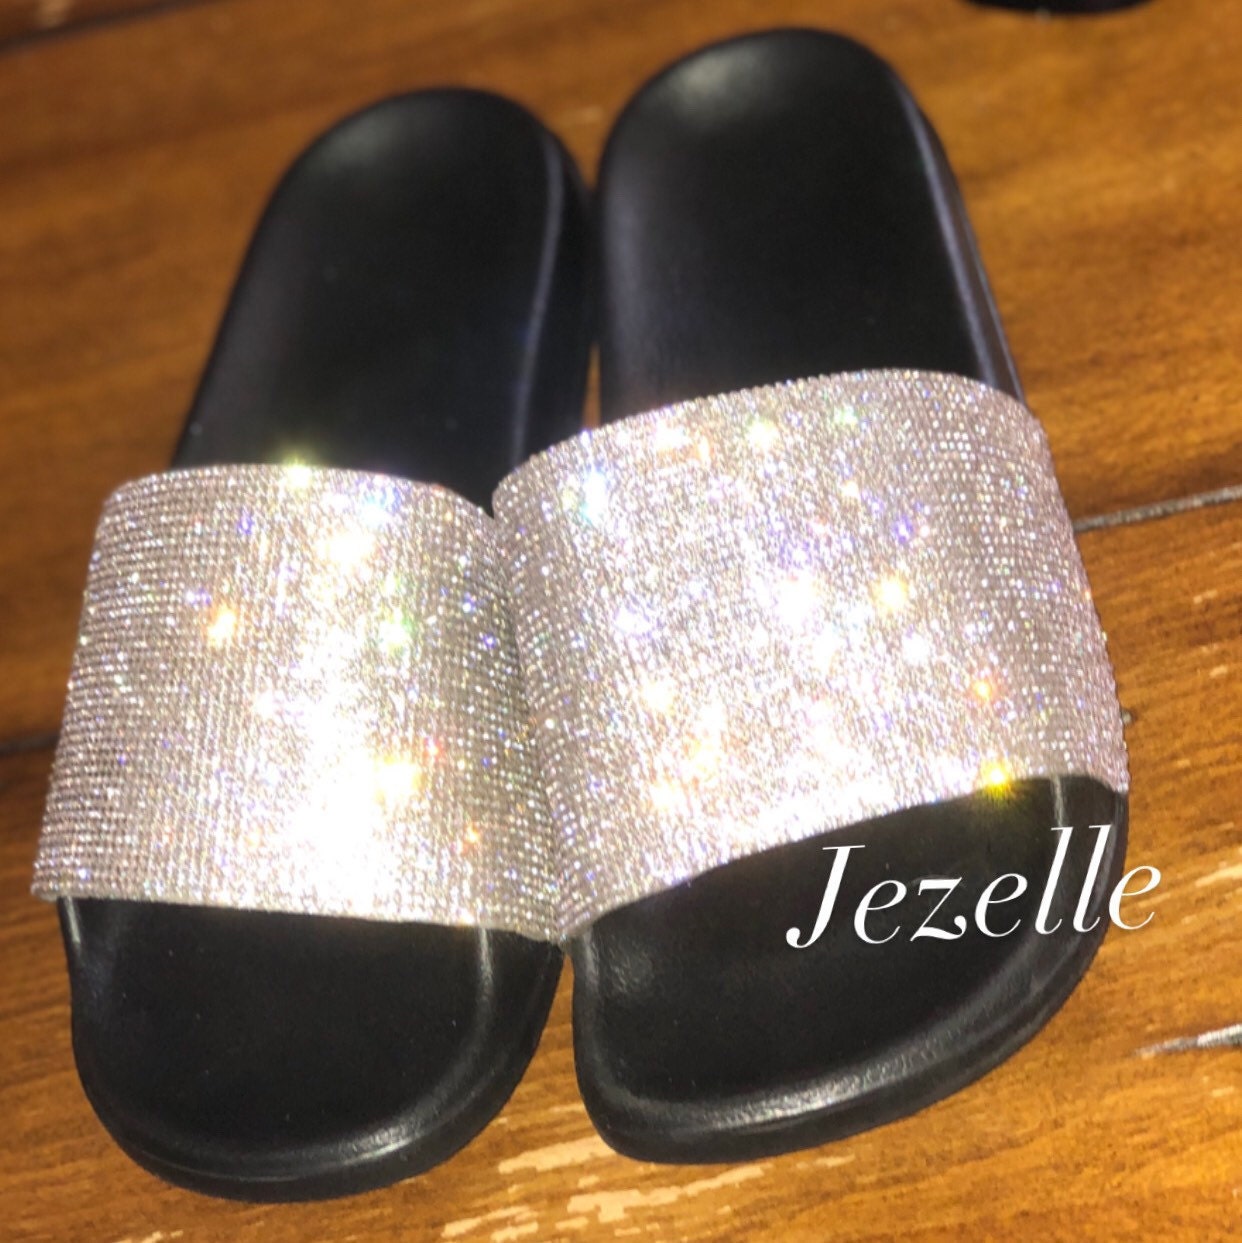 Updates from JezelleDesigns on Etsy